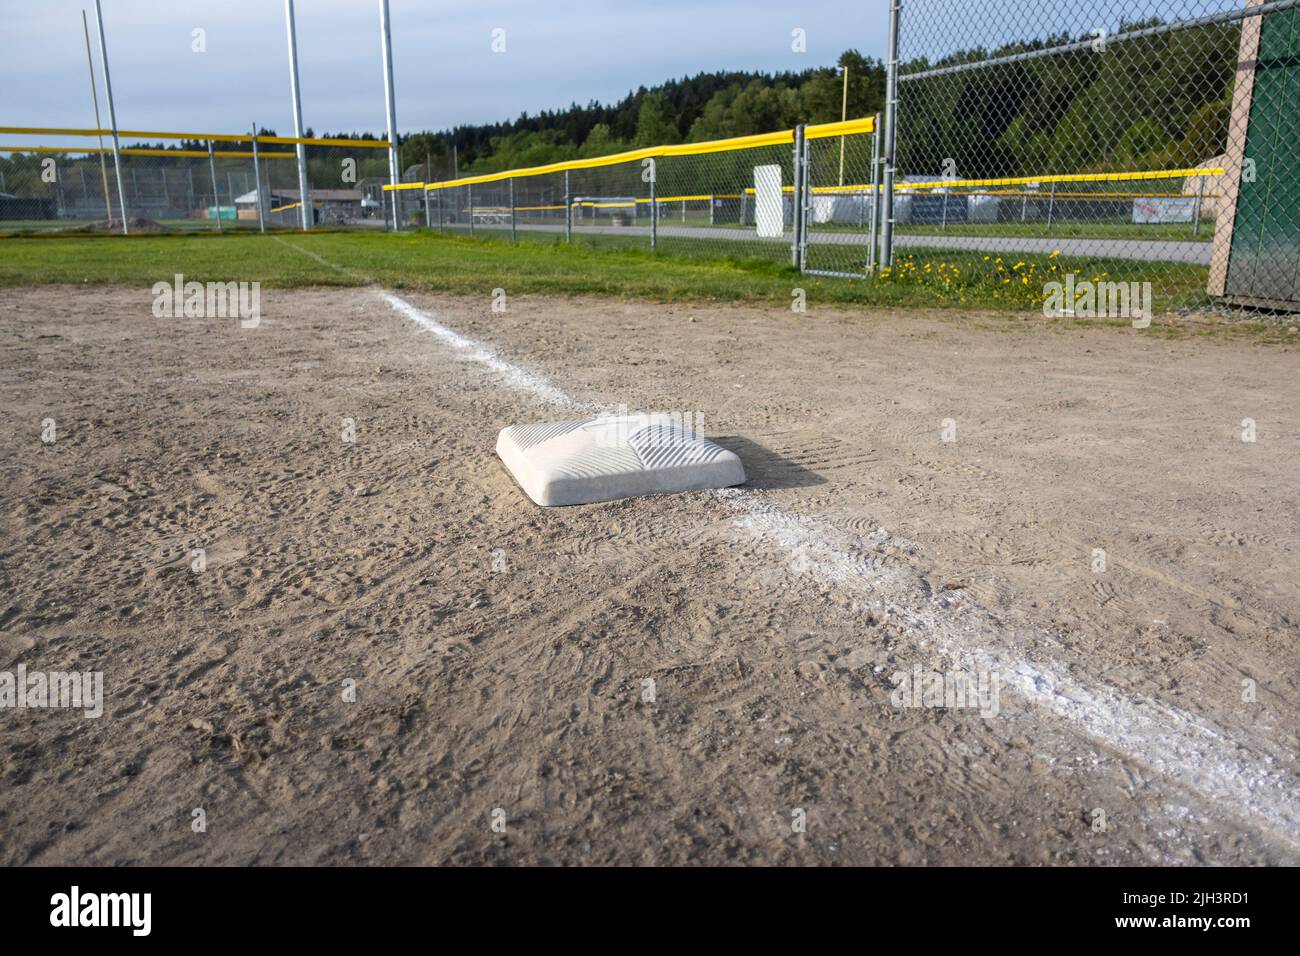 close up view of a base on a clean baseball field on a bright, sunny day Stock Photo